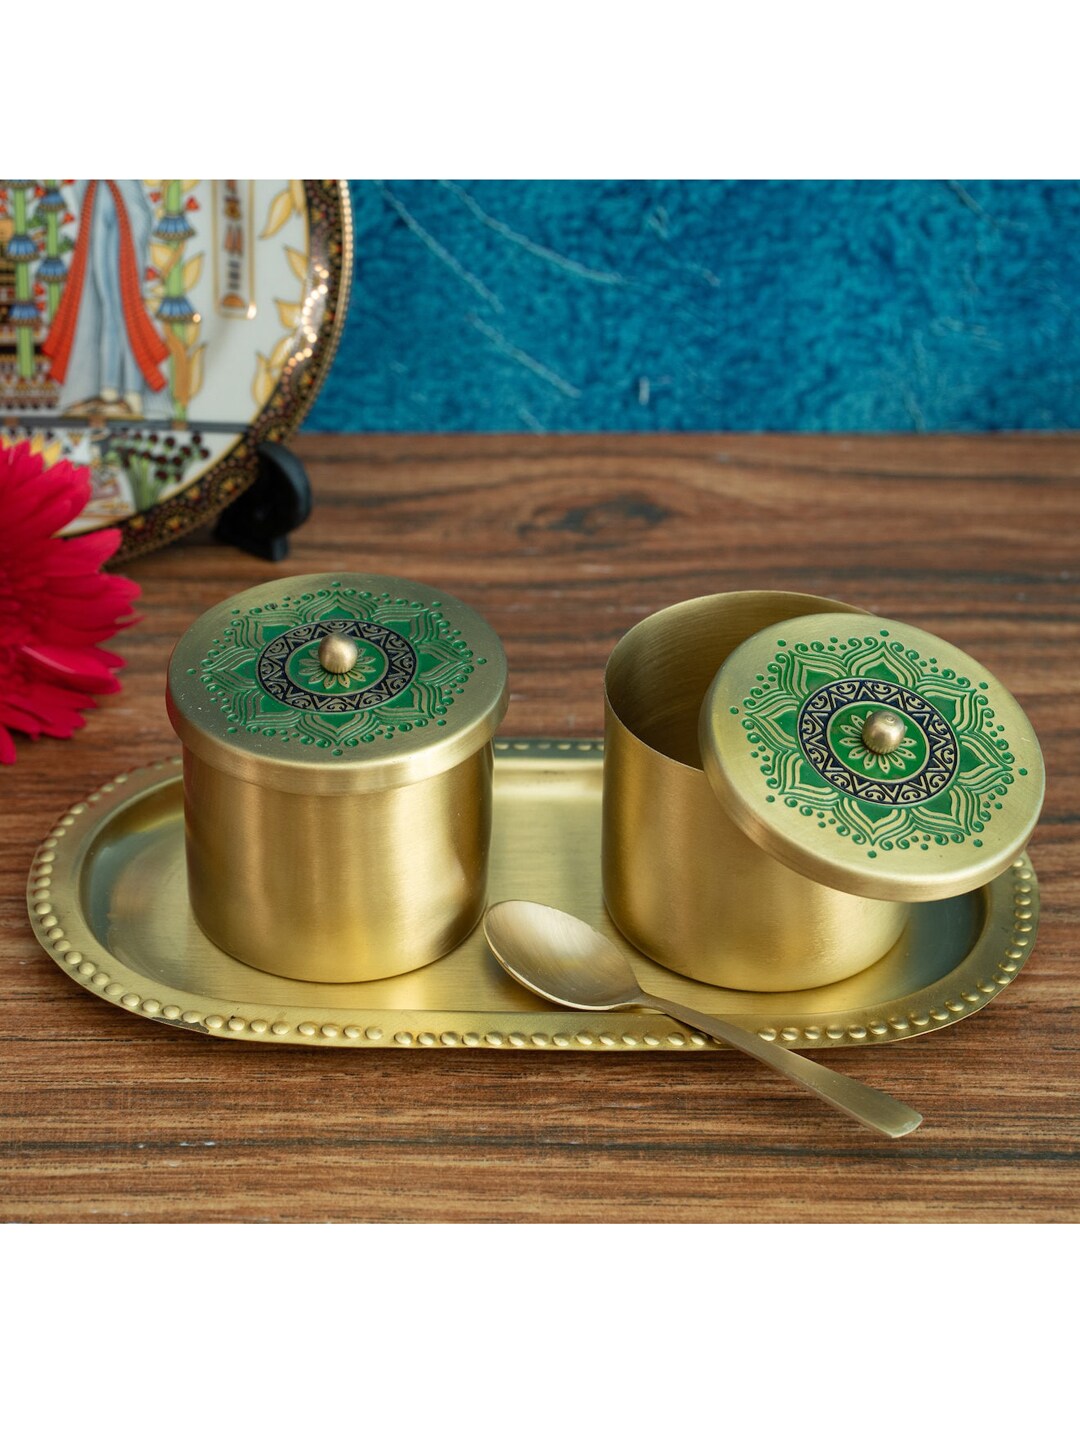 nakshikathaa Gold Toned & Green 2 Brass Condiment Jars with Tray and Spoon Price in India